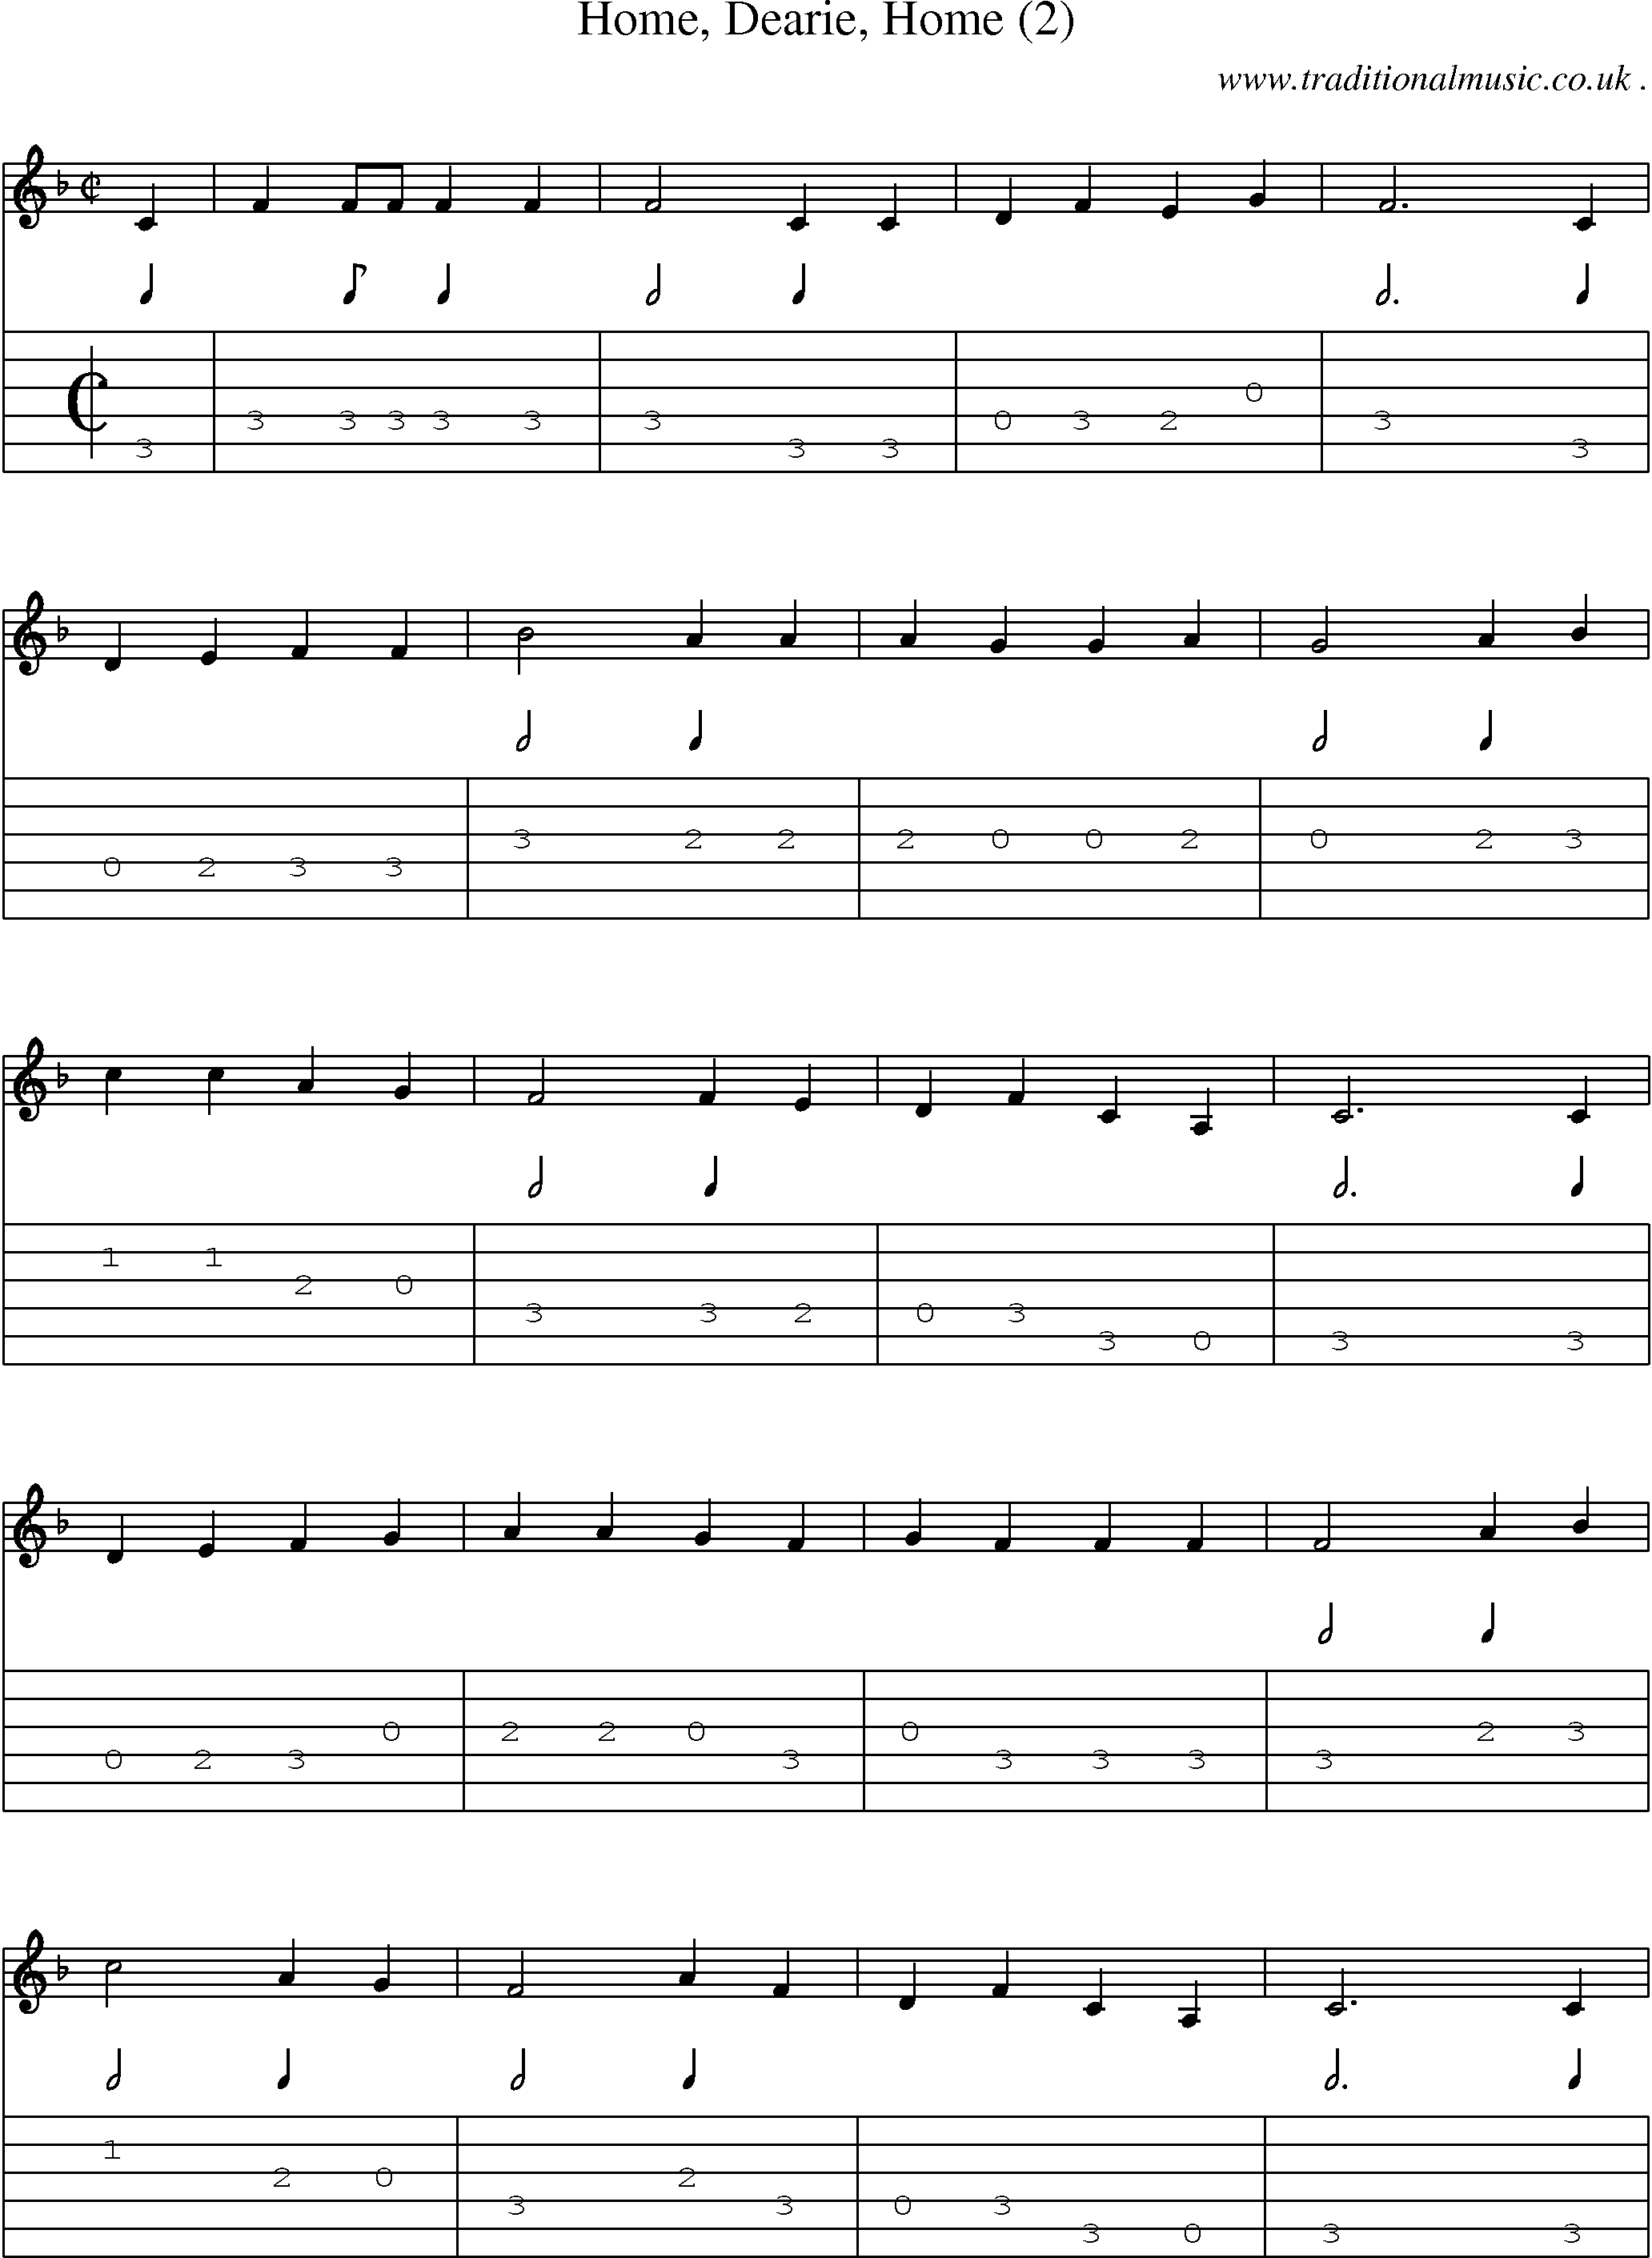 Sheet-Music and Guitar Tabs for Home Dearie Home (2)